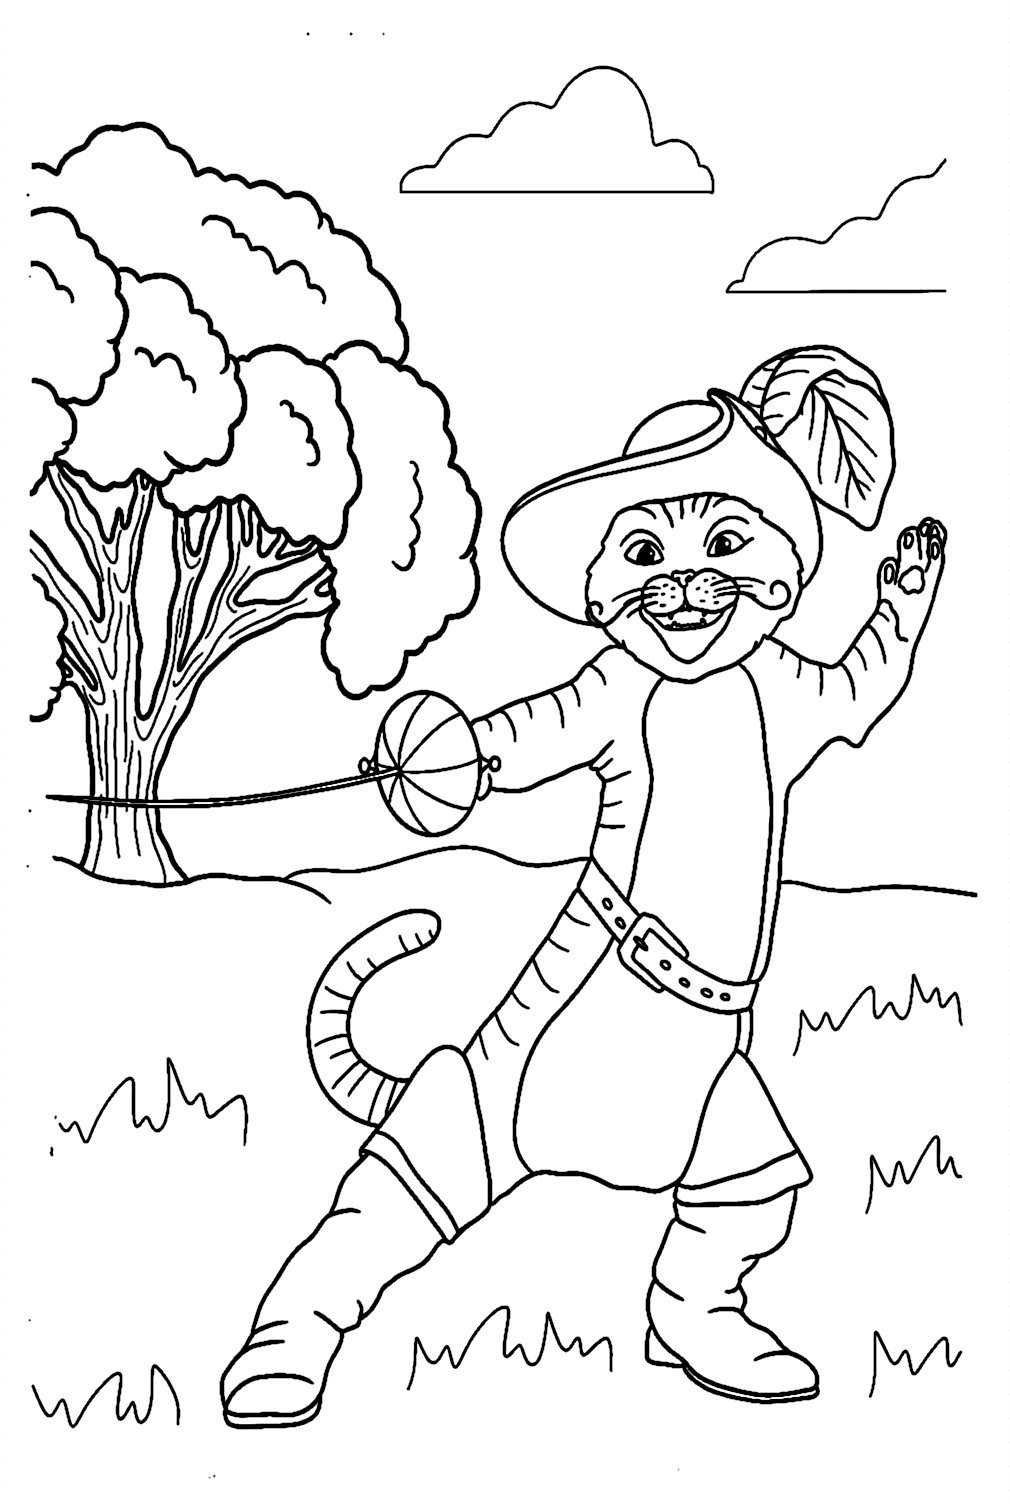 Puss In Boots Coloring Page